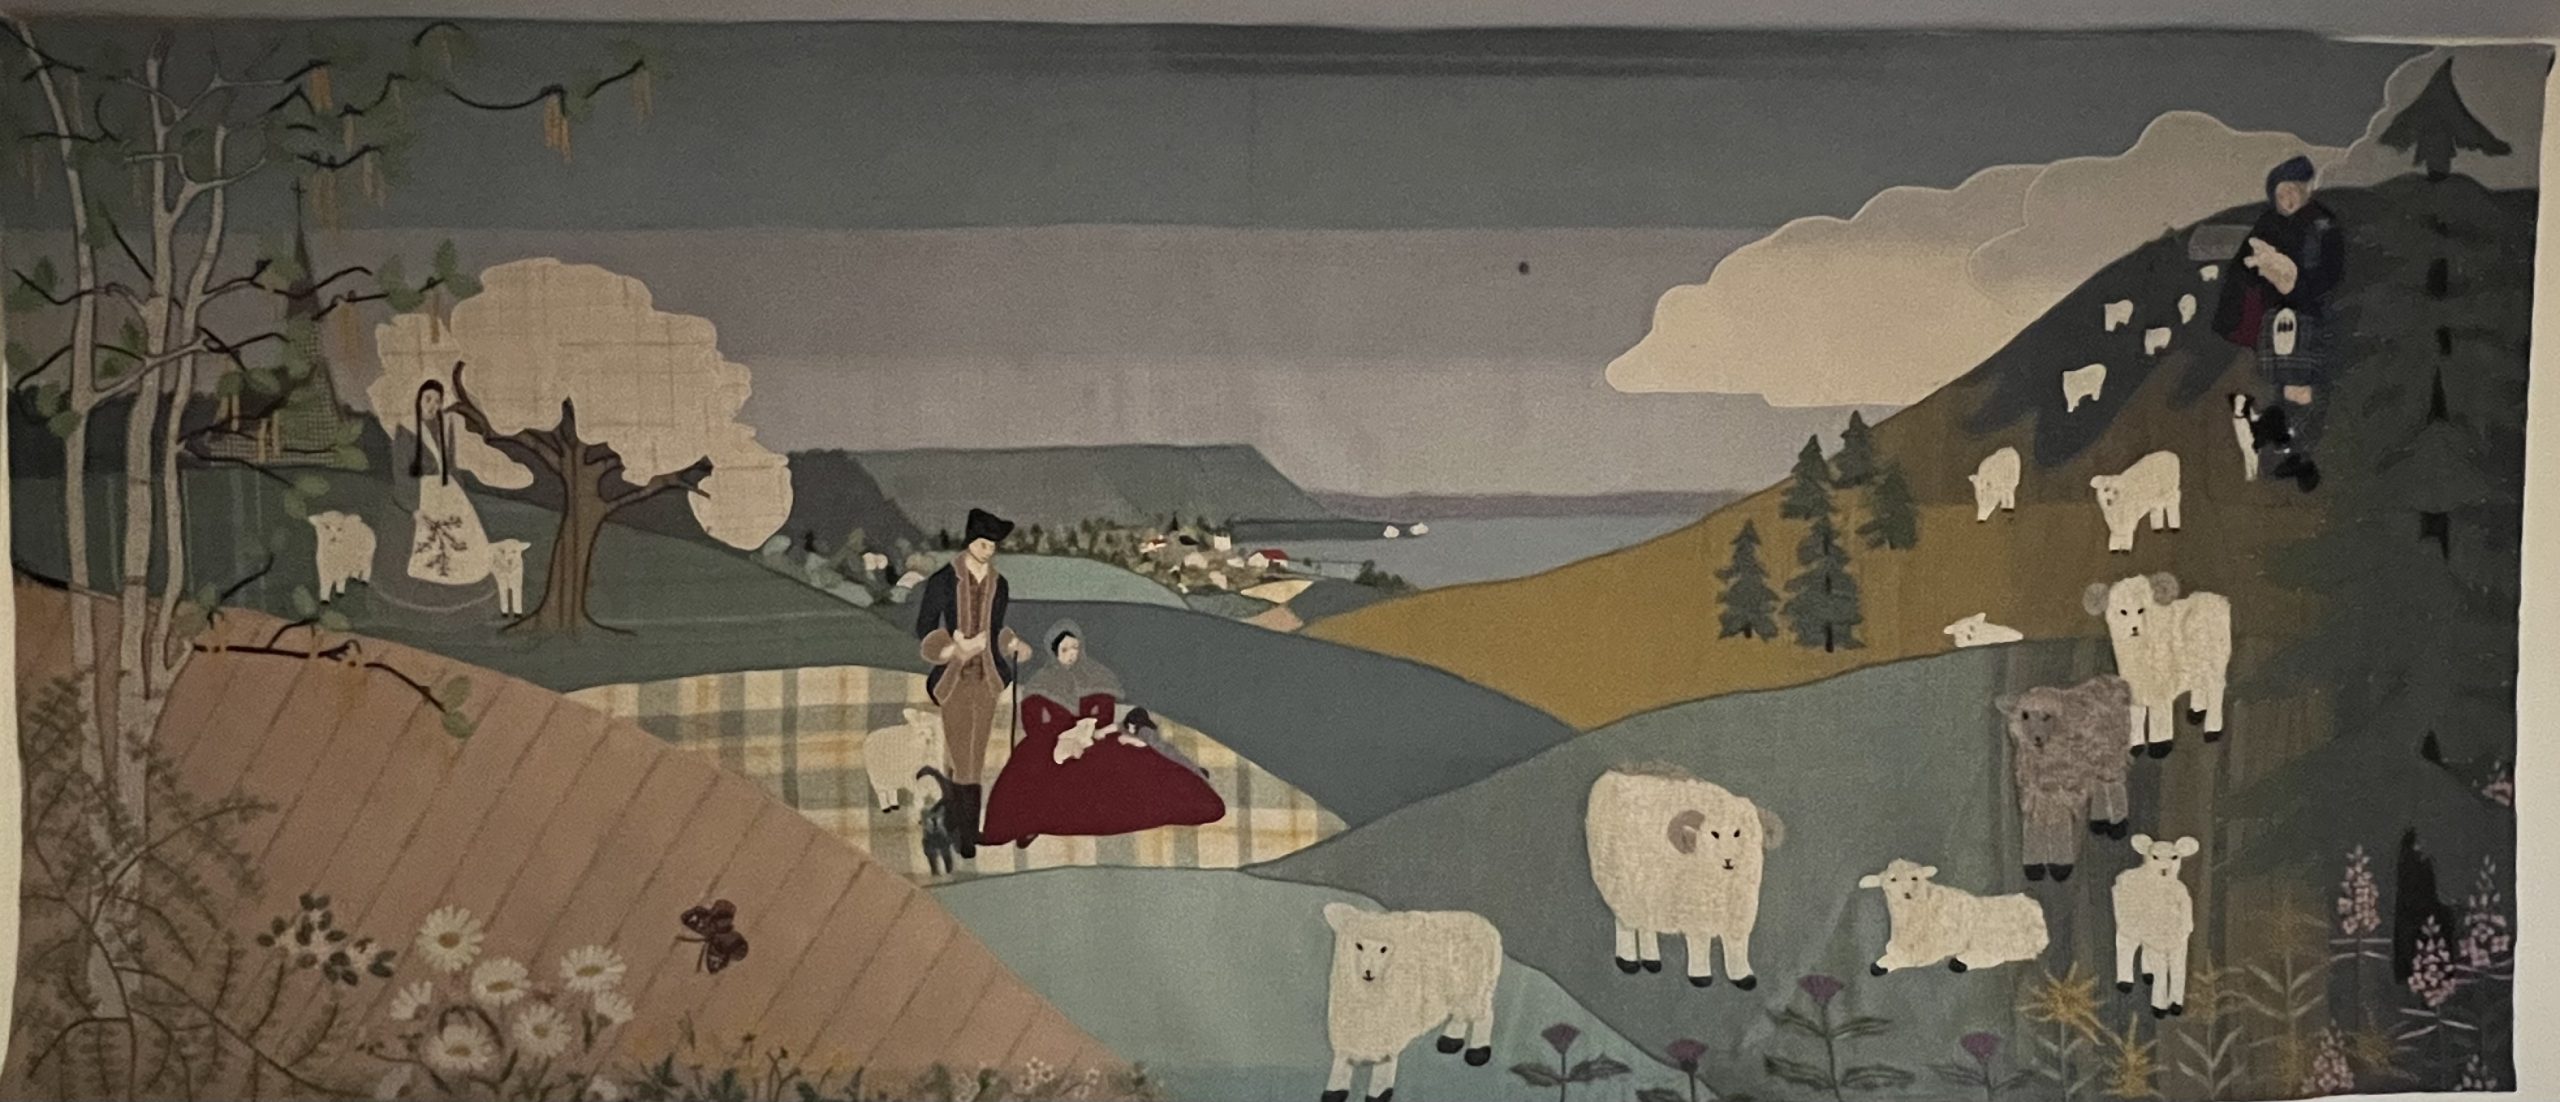 Wool applique mural depicting Nova Scotia’s shifting environment with spring, summer, and autumn scenes taking place along a single bucolic landscape.